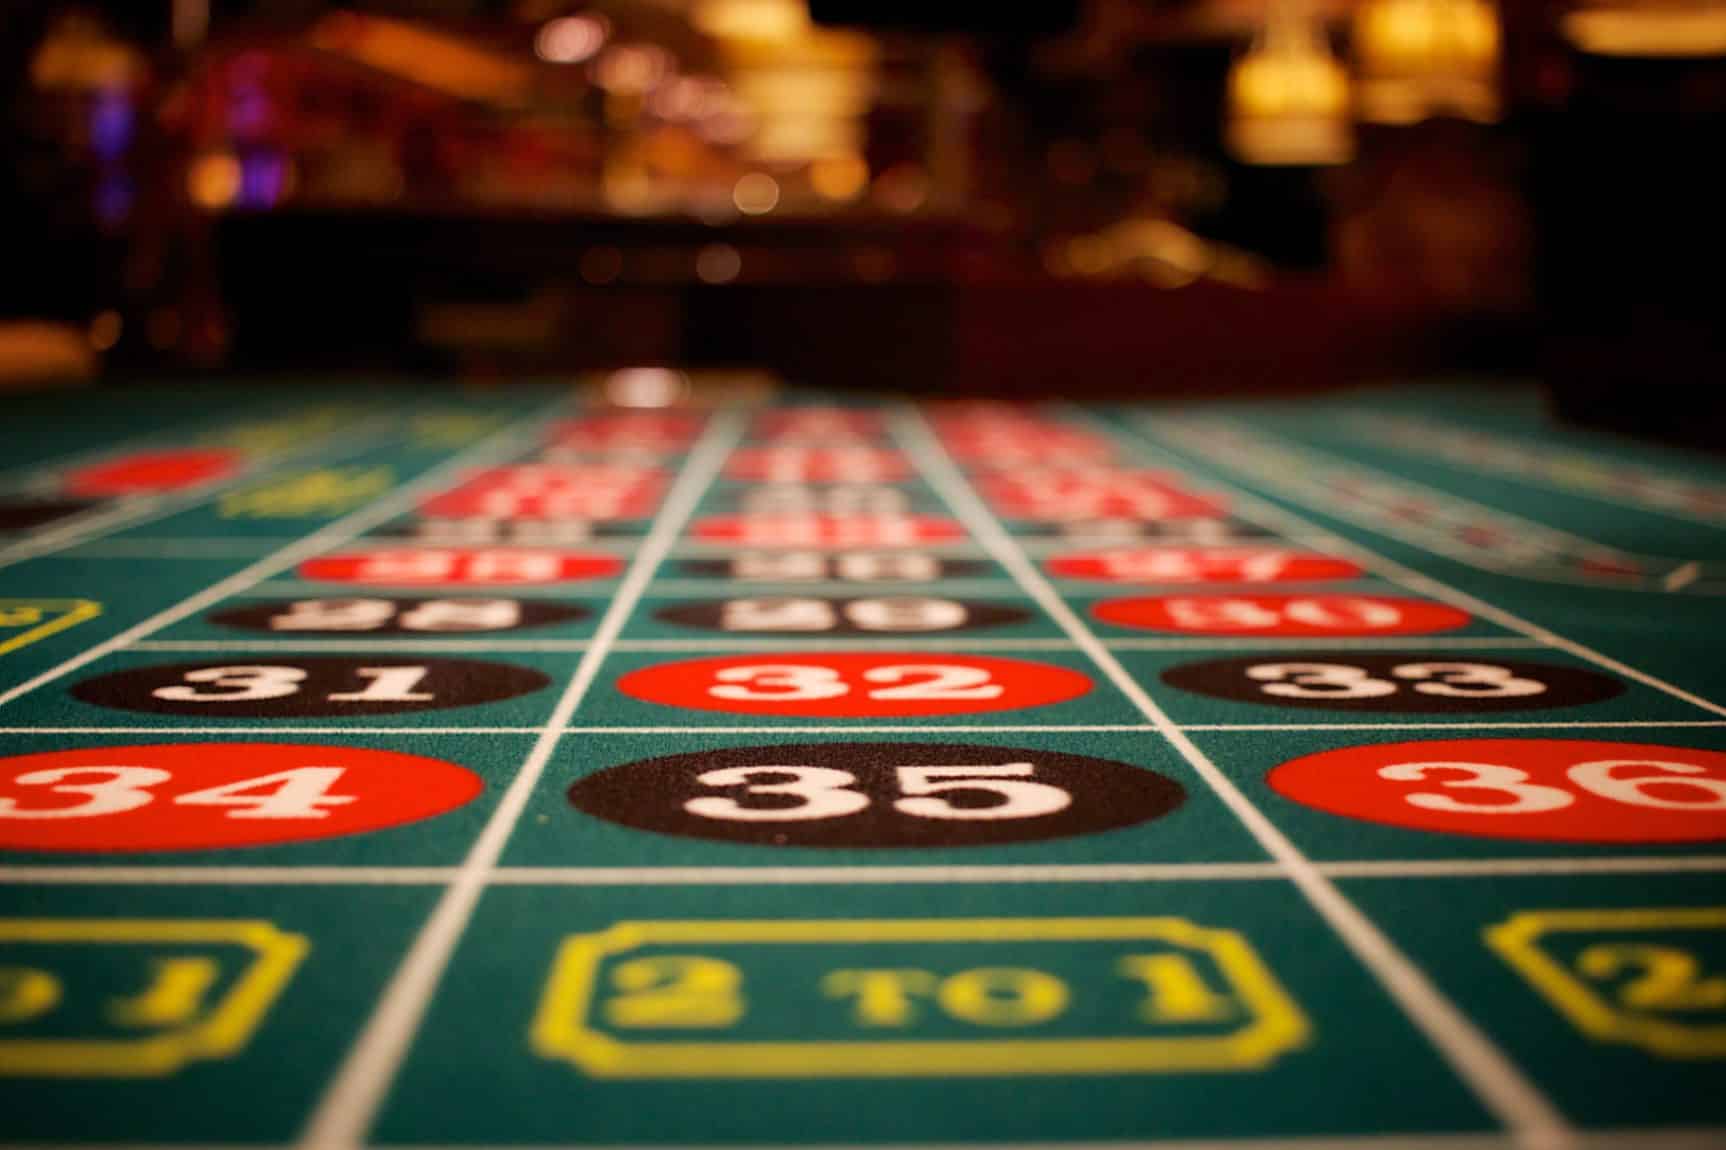 How do I avoid getting addicted to Roulette?